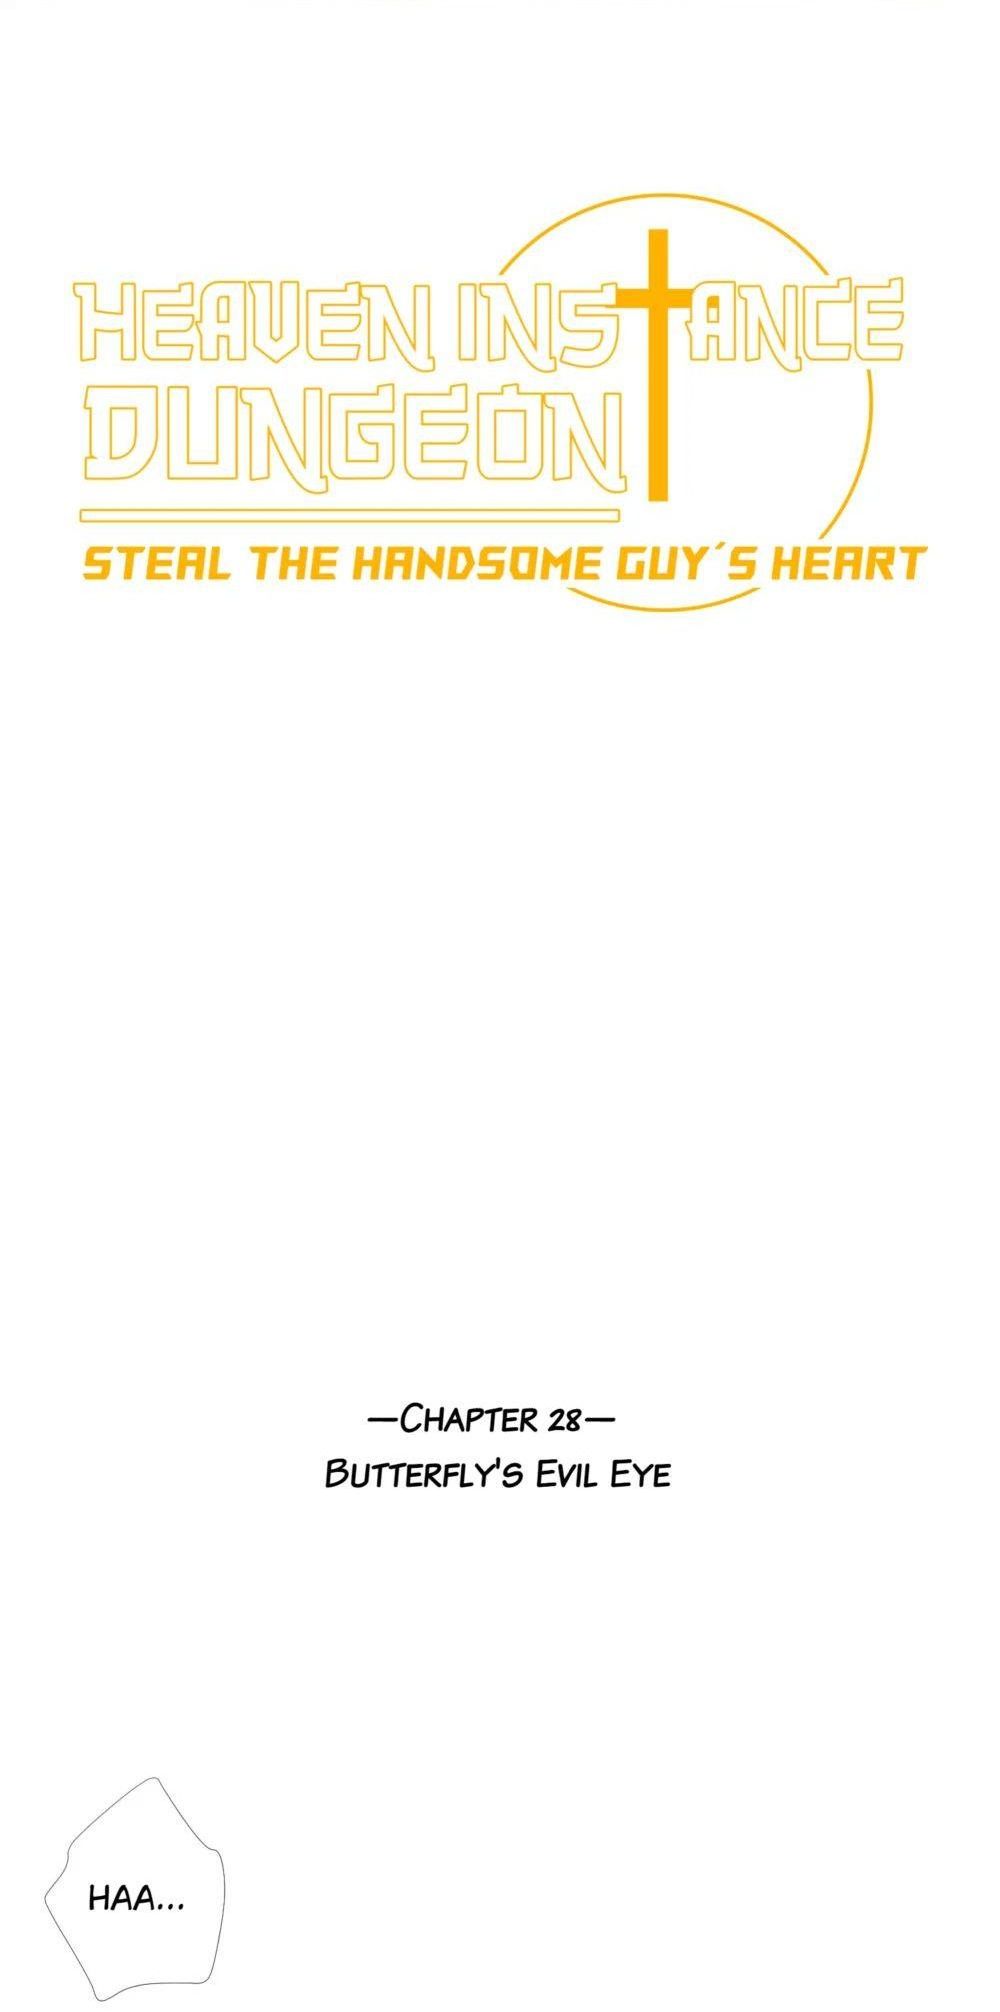 Heaven Instance Dungeon - Steal The Handsome Guy’S Heart - Page 1